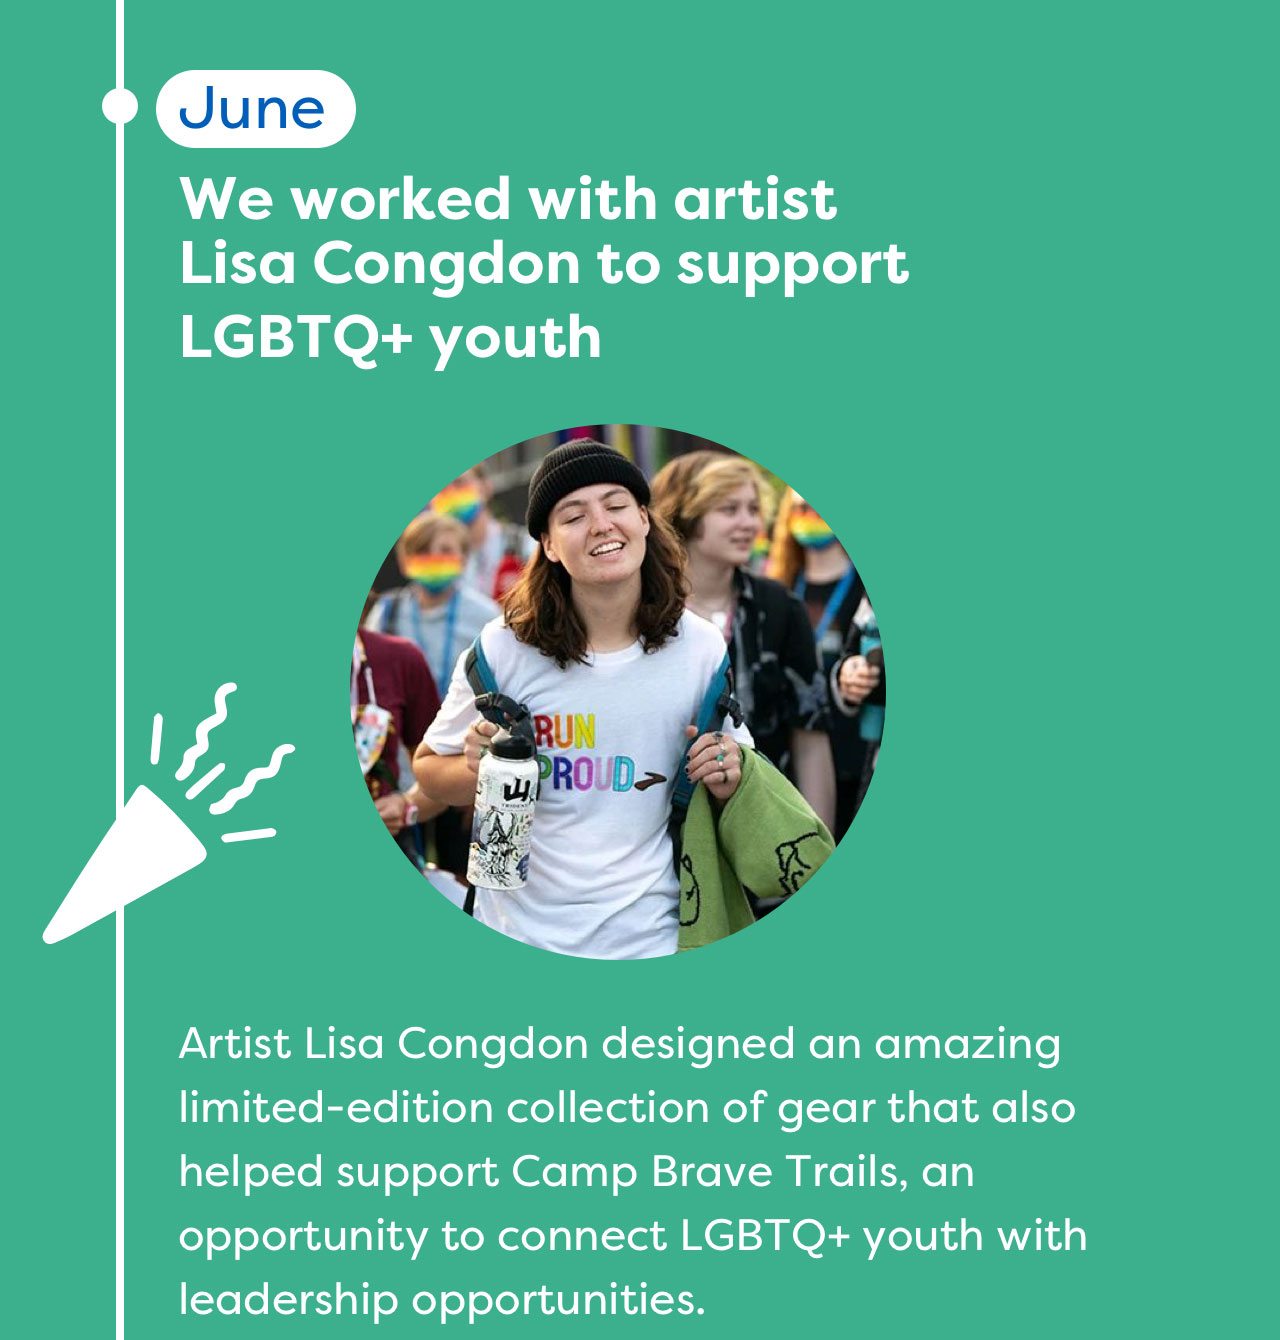 We worked with artist Lisa Congdon to support LGBTQ+ youth